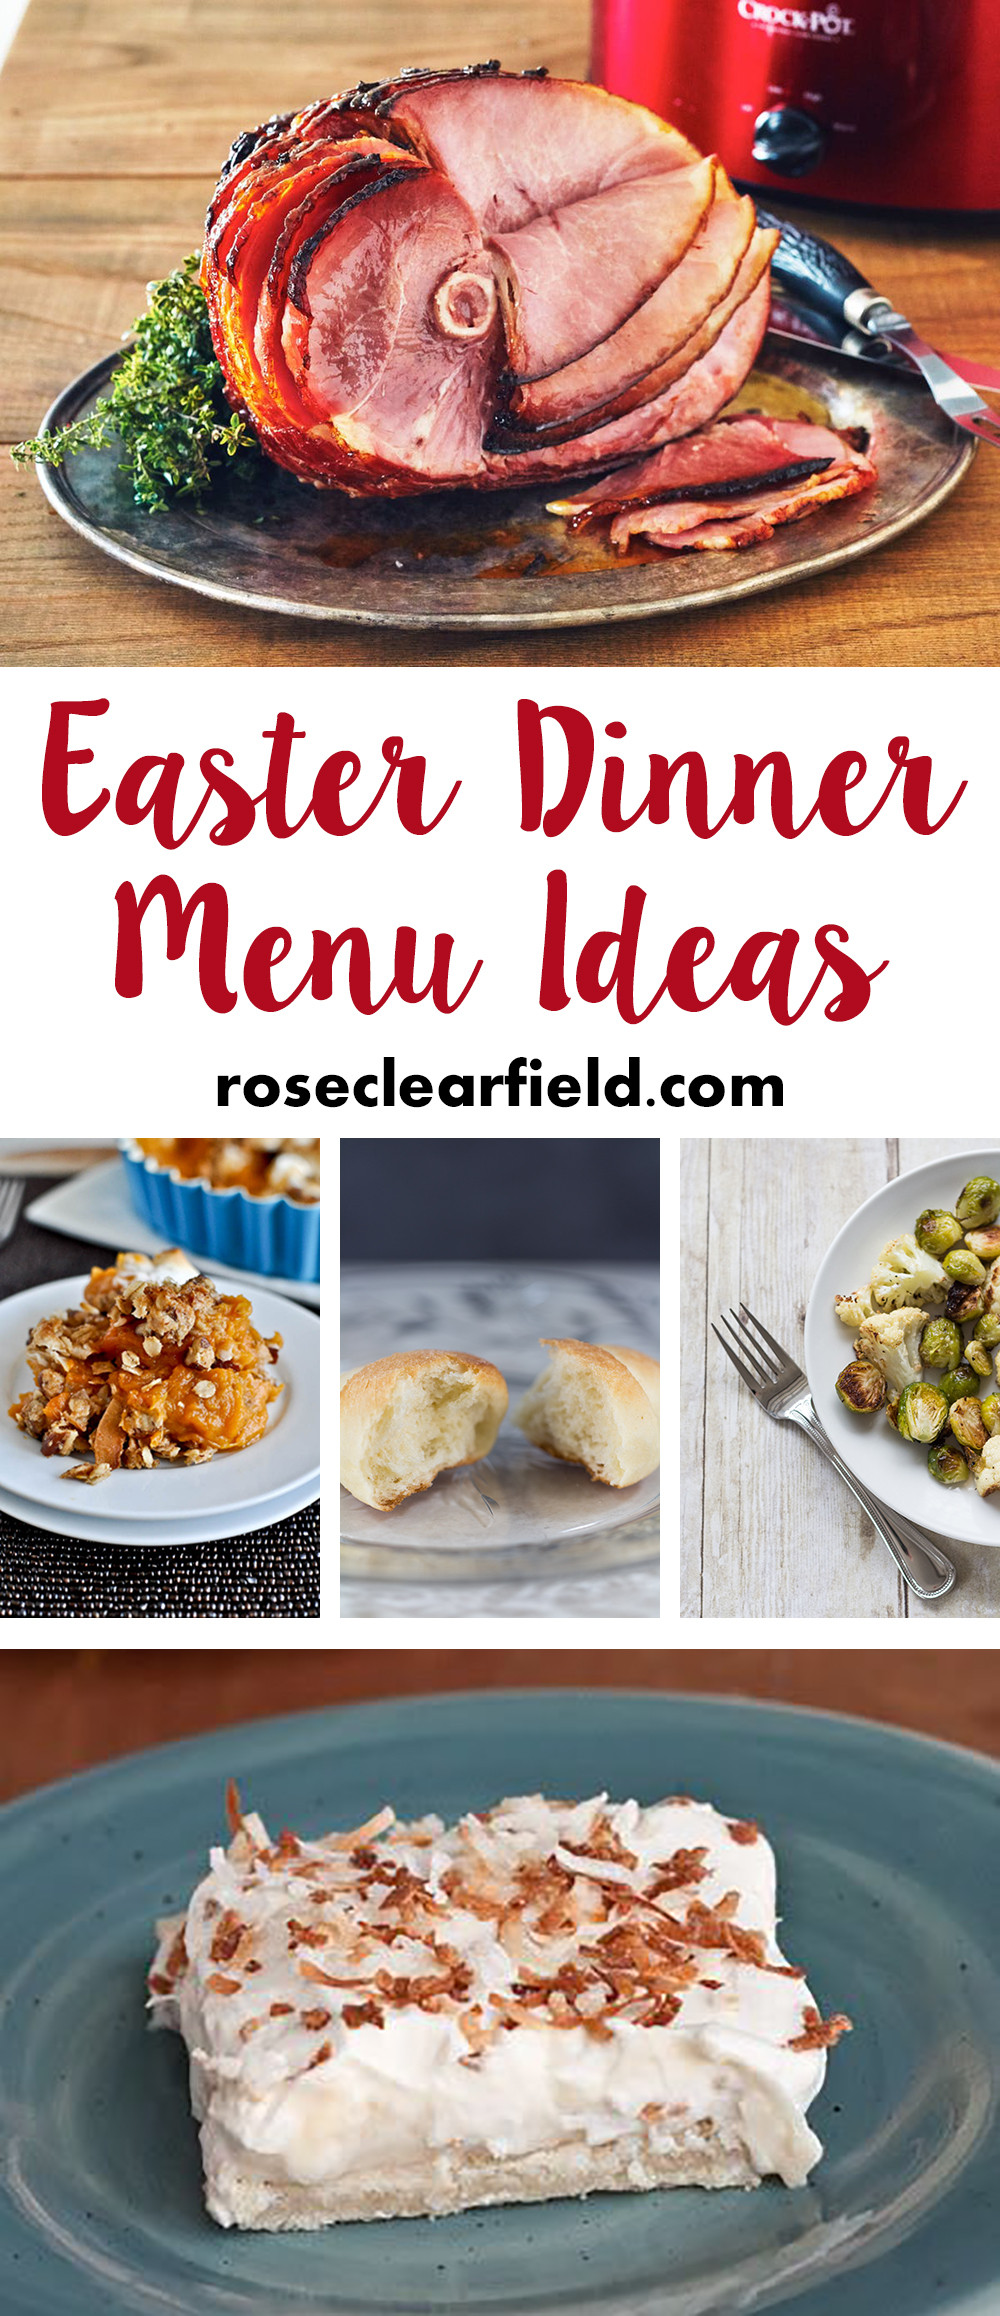 Easter Dinner Ideas With Ham
 Easter Dinner Menu Ideas • Rose Clearfield